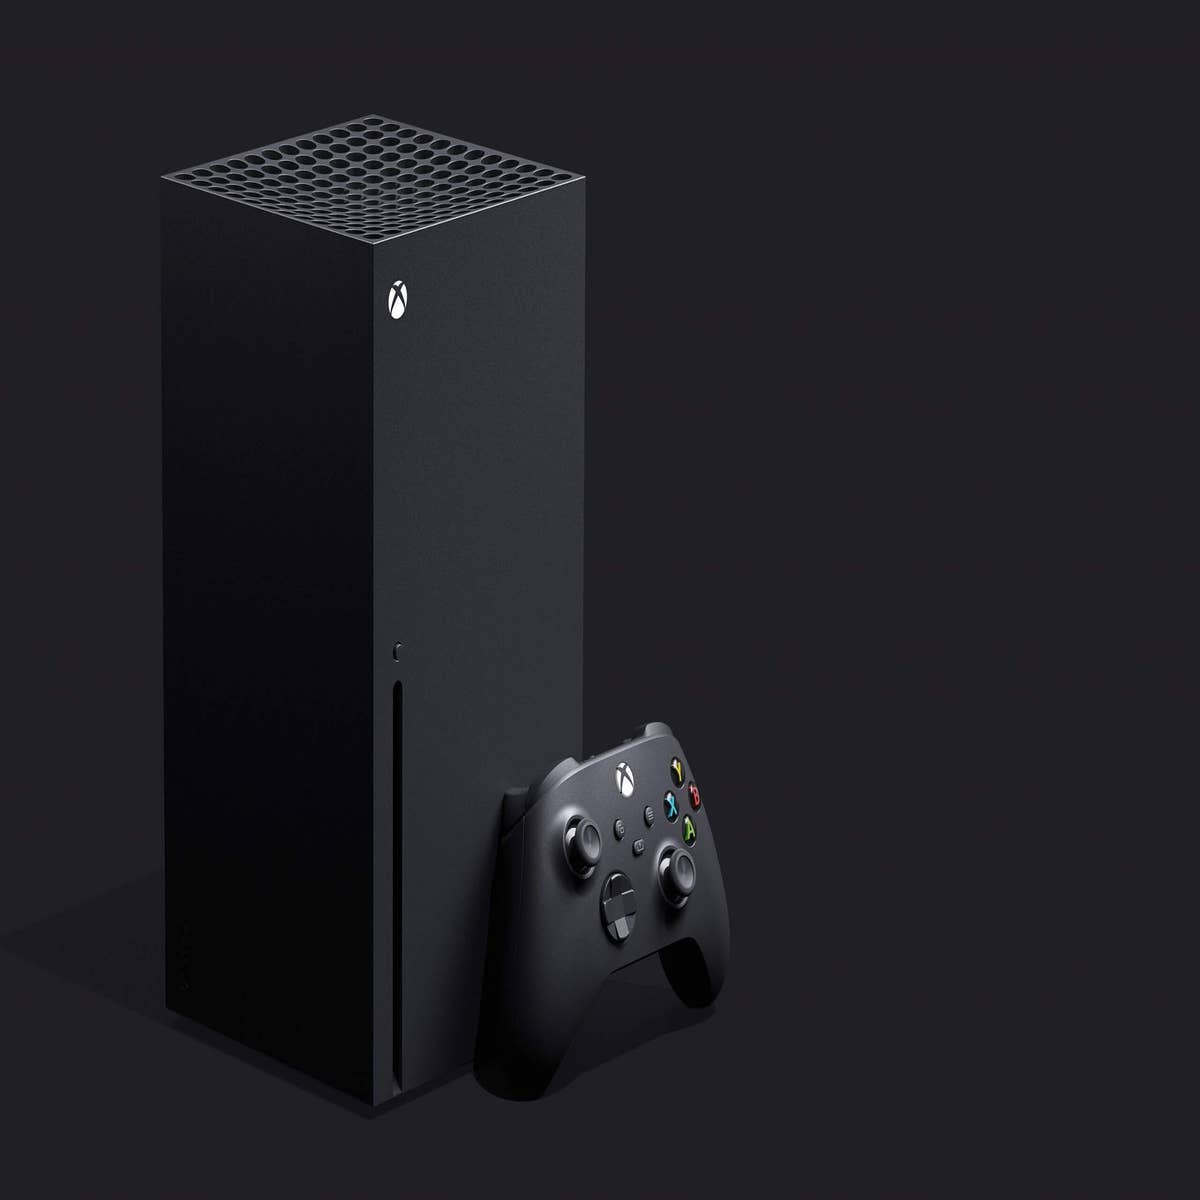 Xbox One officially discontinued as of 2020